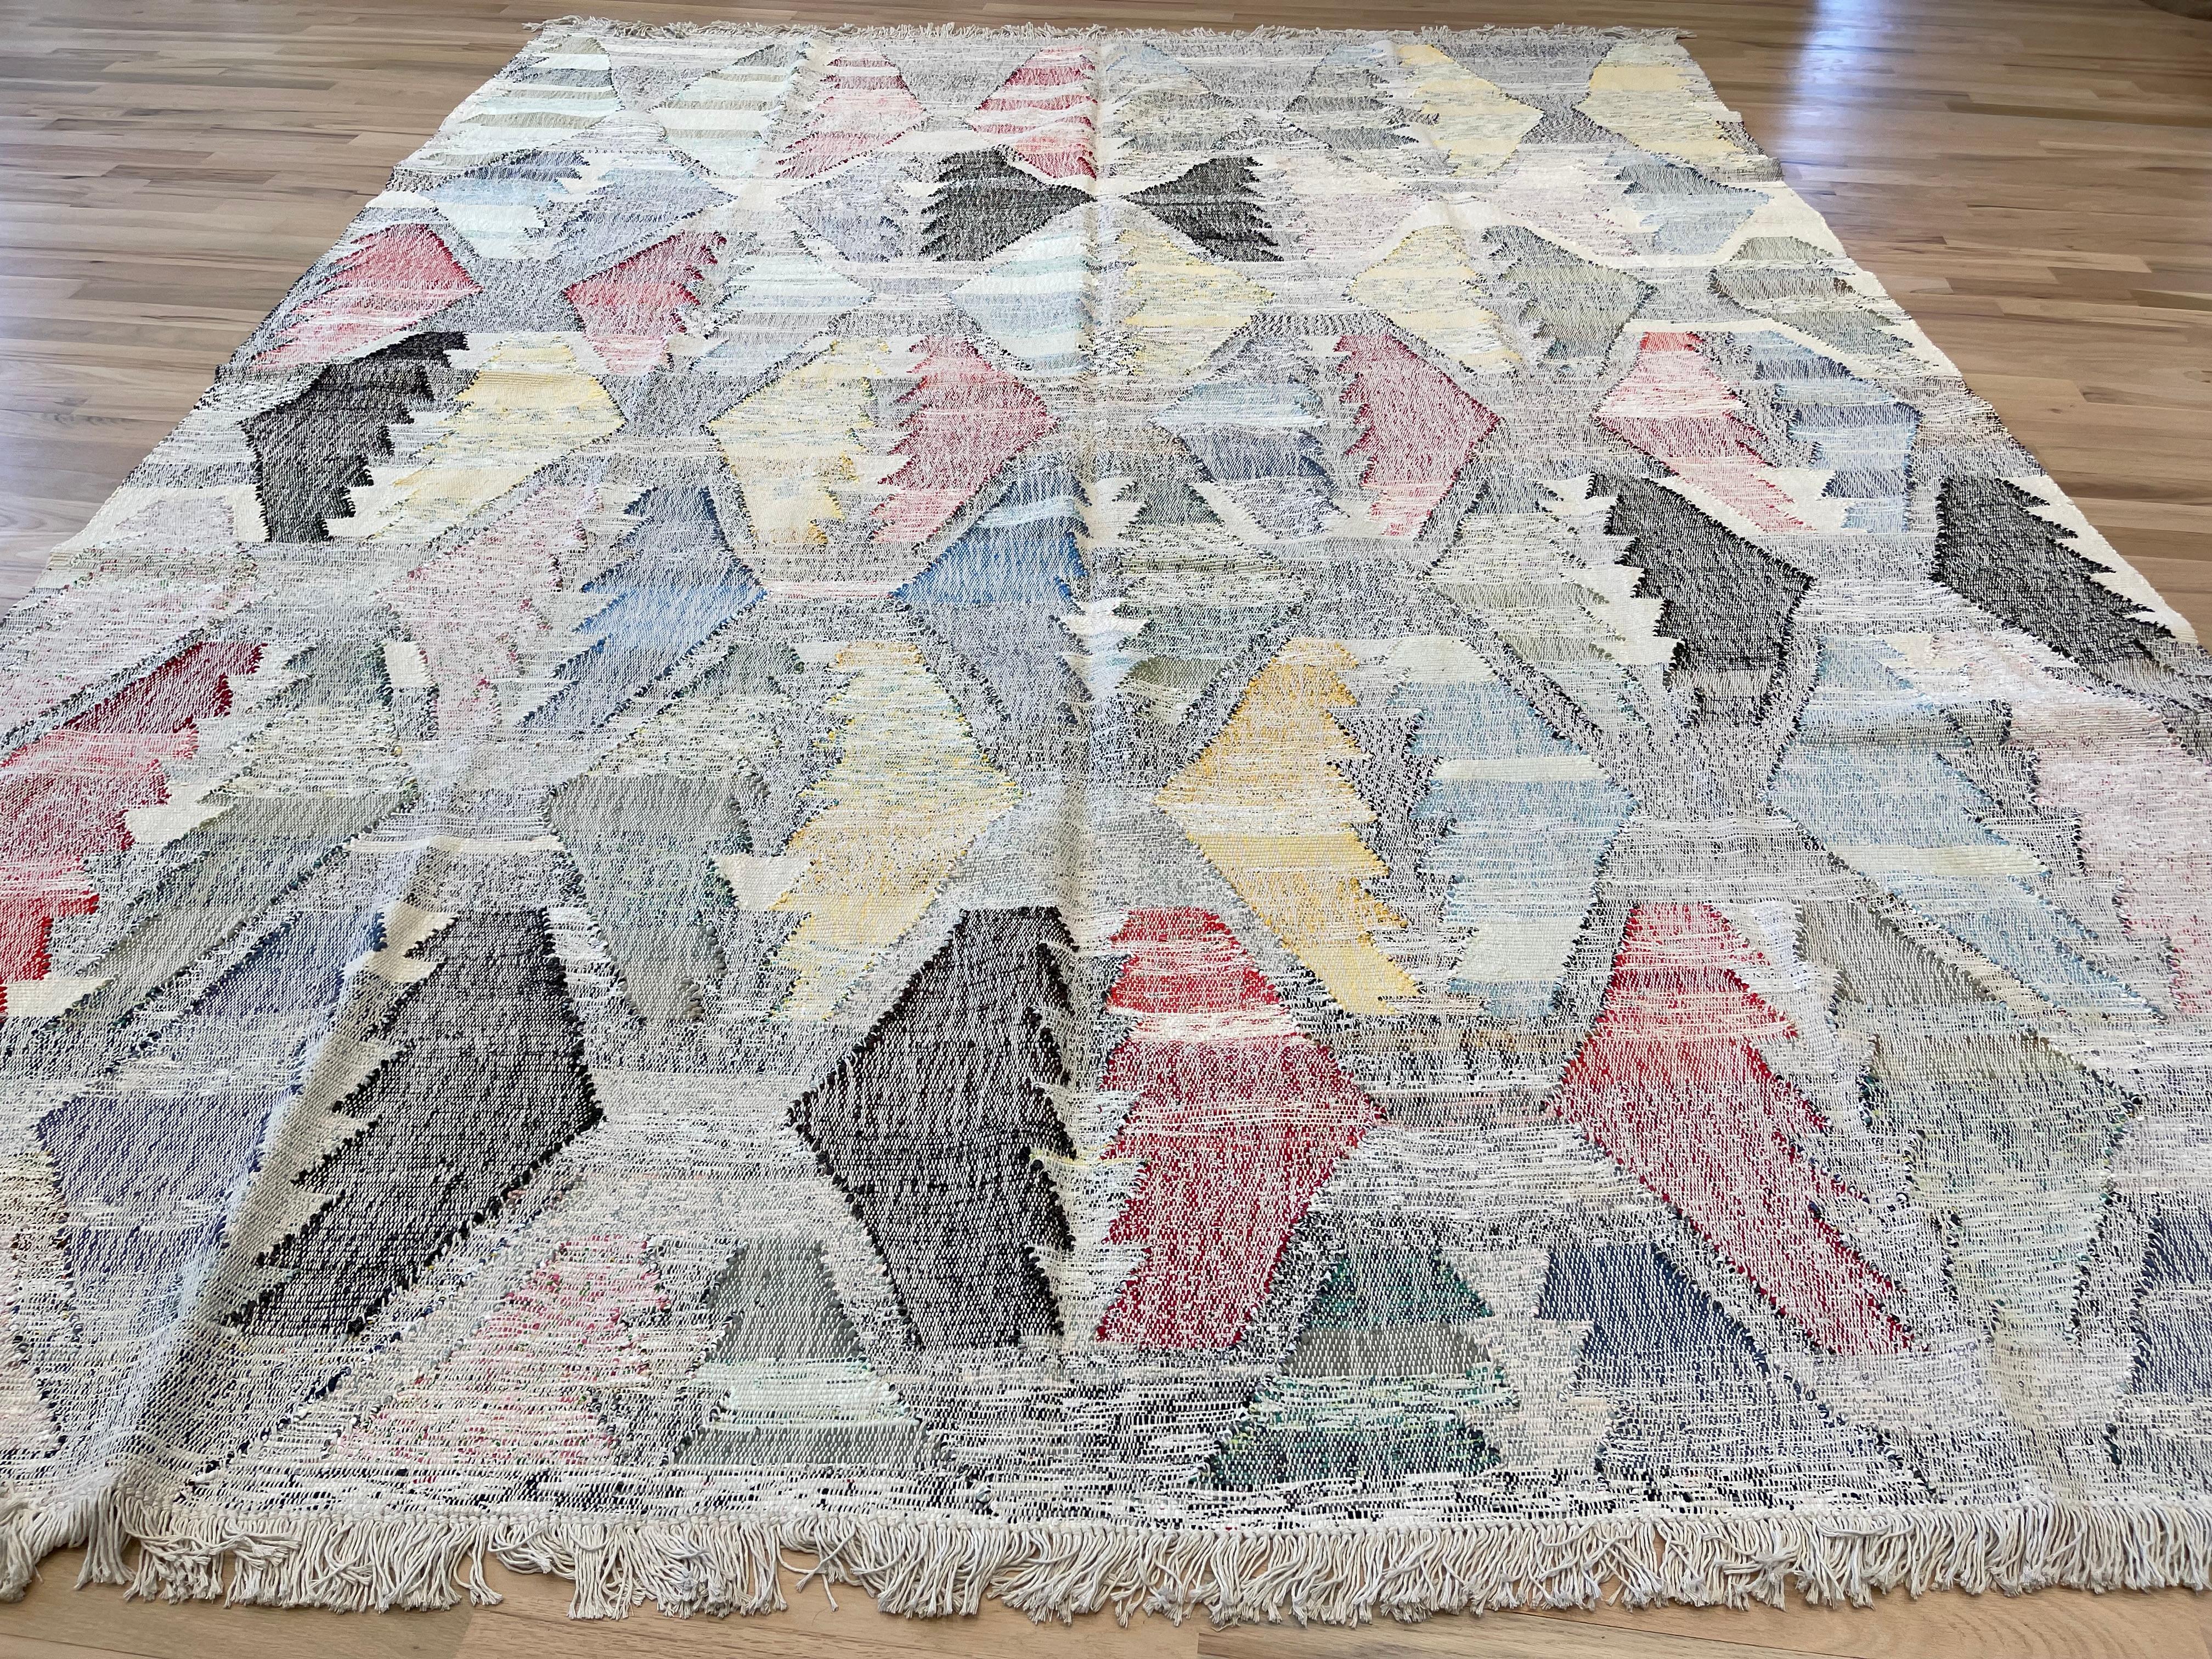 This Turkish rug features a colorful geometric design  allowing you to switch up your decor. Add a touch of style to any room while also having the option to change things up to suit your mood. Beautiful and versatile, this rug is a must-have for